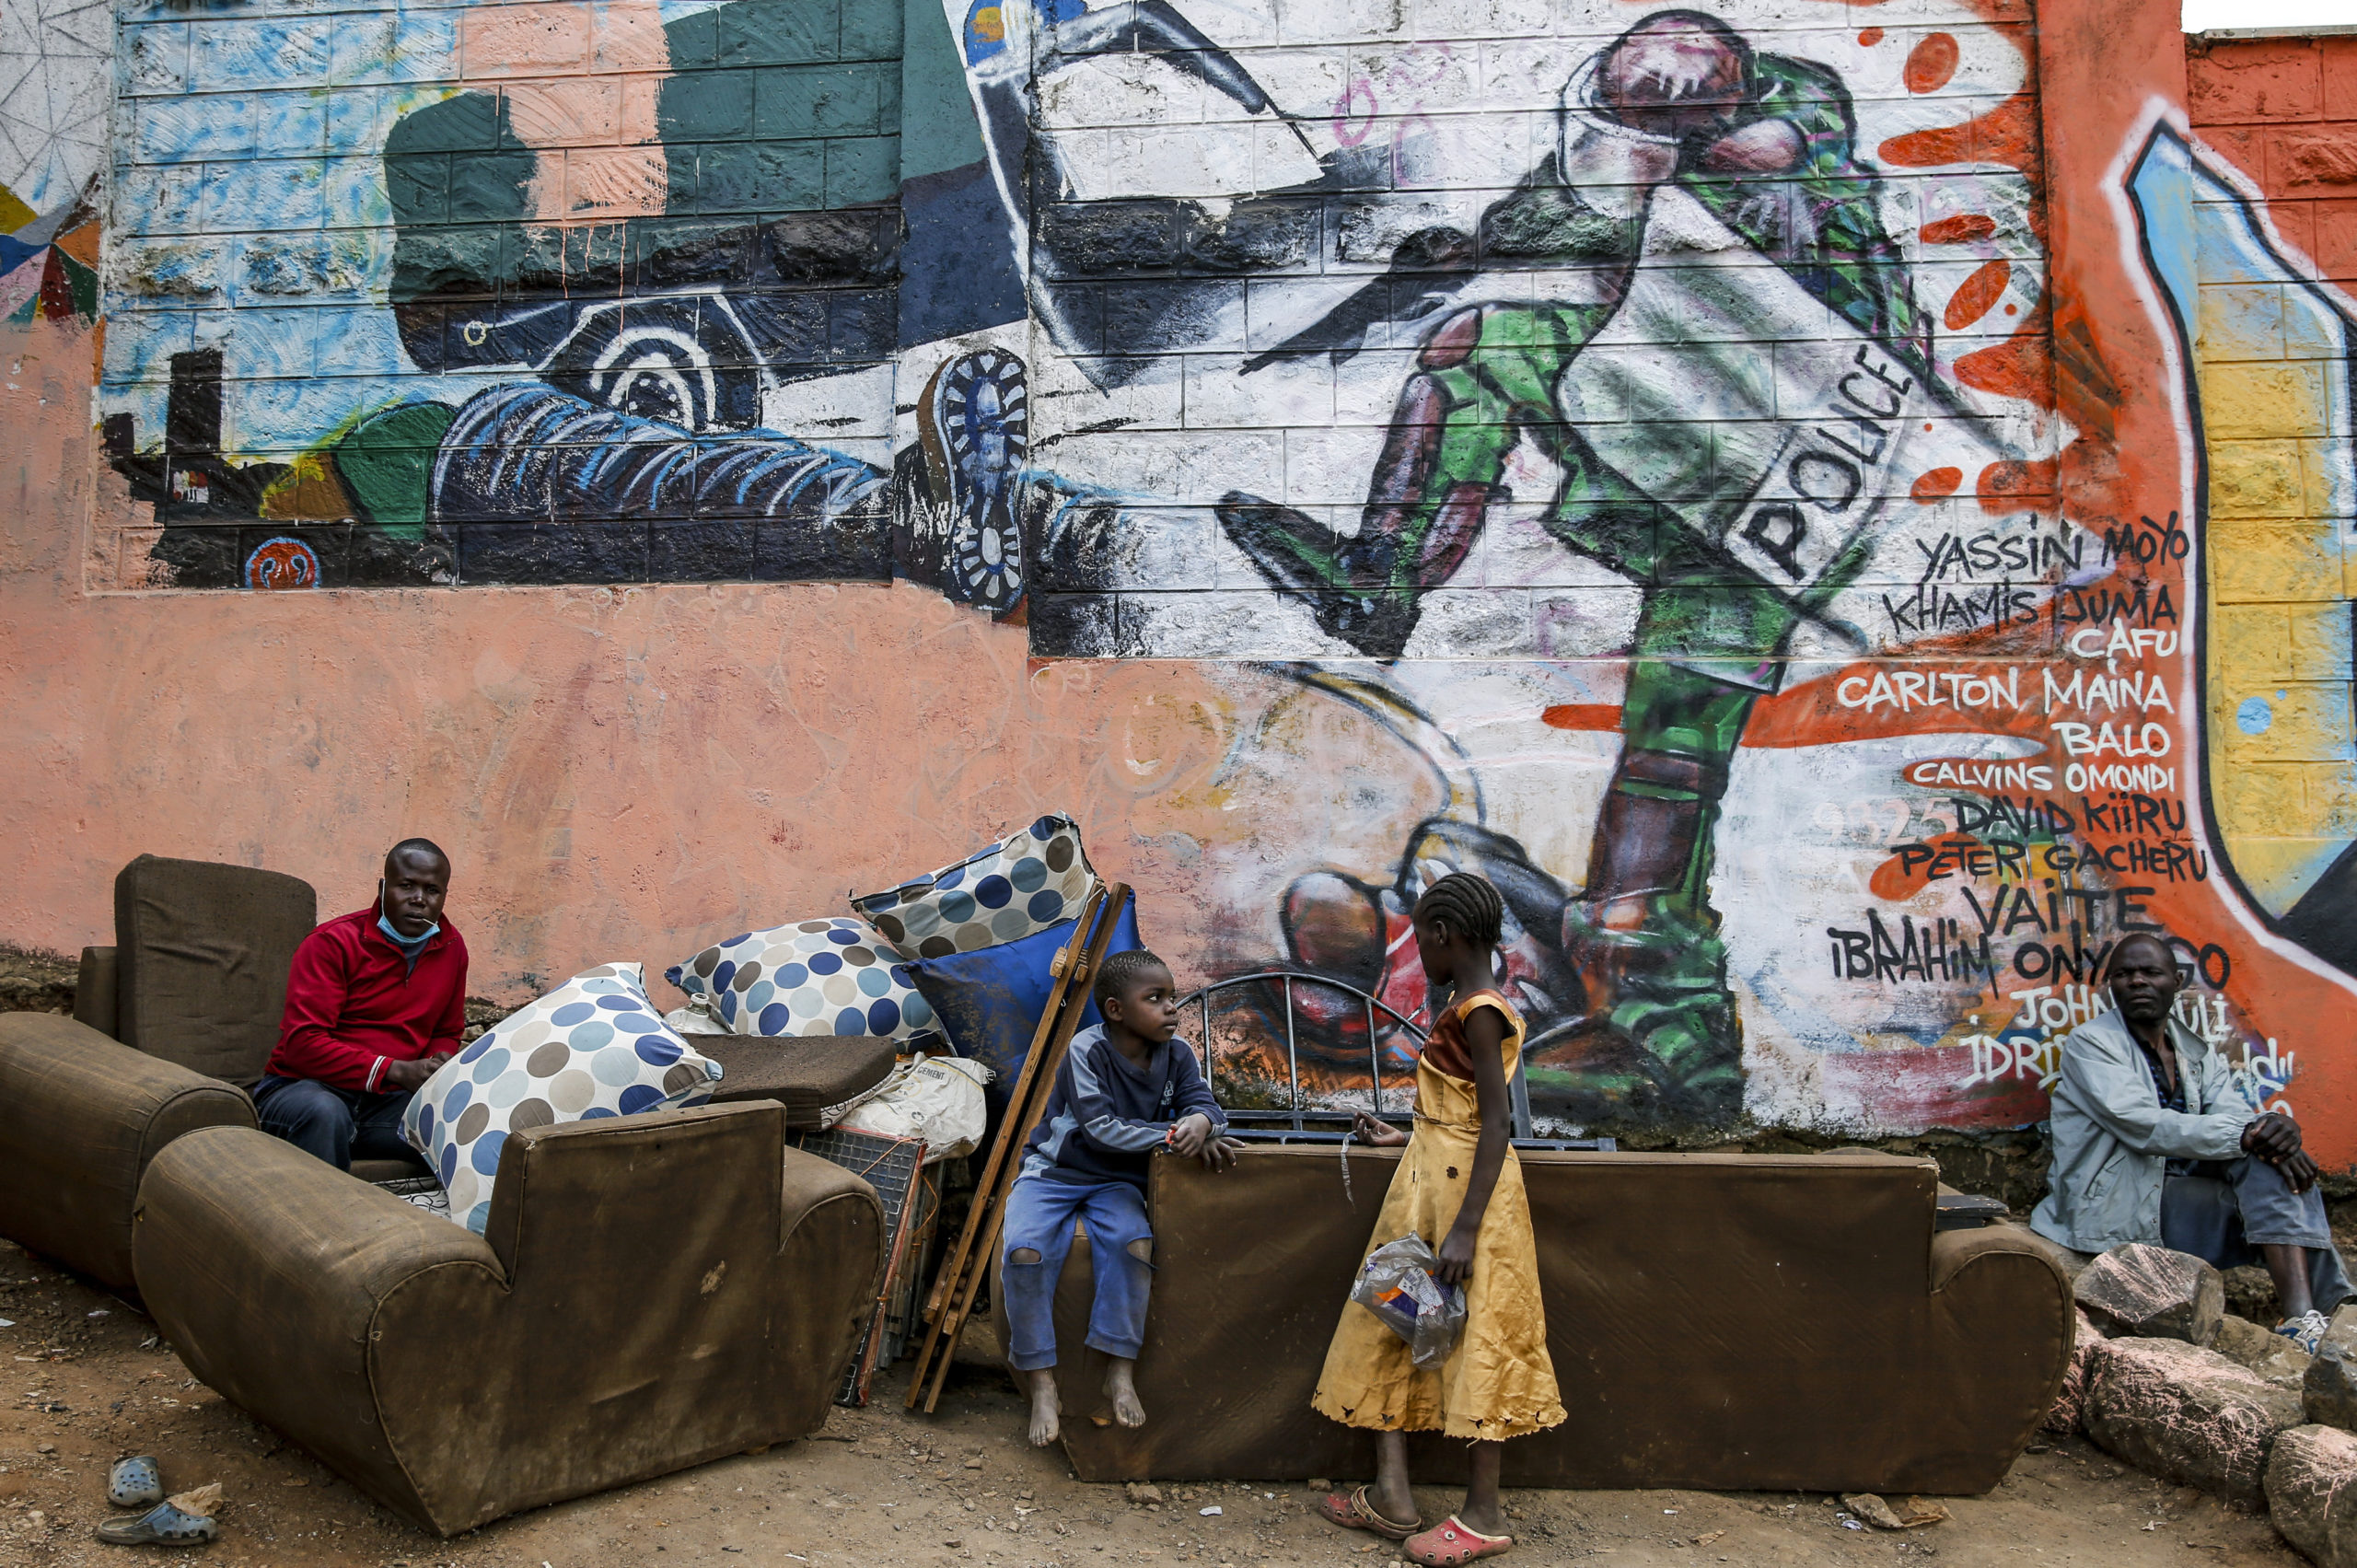 FILE - In this June 9, 2020, file photo, Kenyan children and men are photographed in the Kibera slum in Nairobi, Kenya, in front of a new mural showing an incident in 2016 when a Kenyan riot policeman repeatedly kicked a protester. The killing of George Floyd in the United States has raised awareness over police violence in South Africa and Kenya. (AP Photo/Brian Inganga, File)